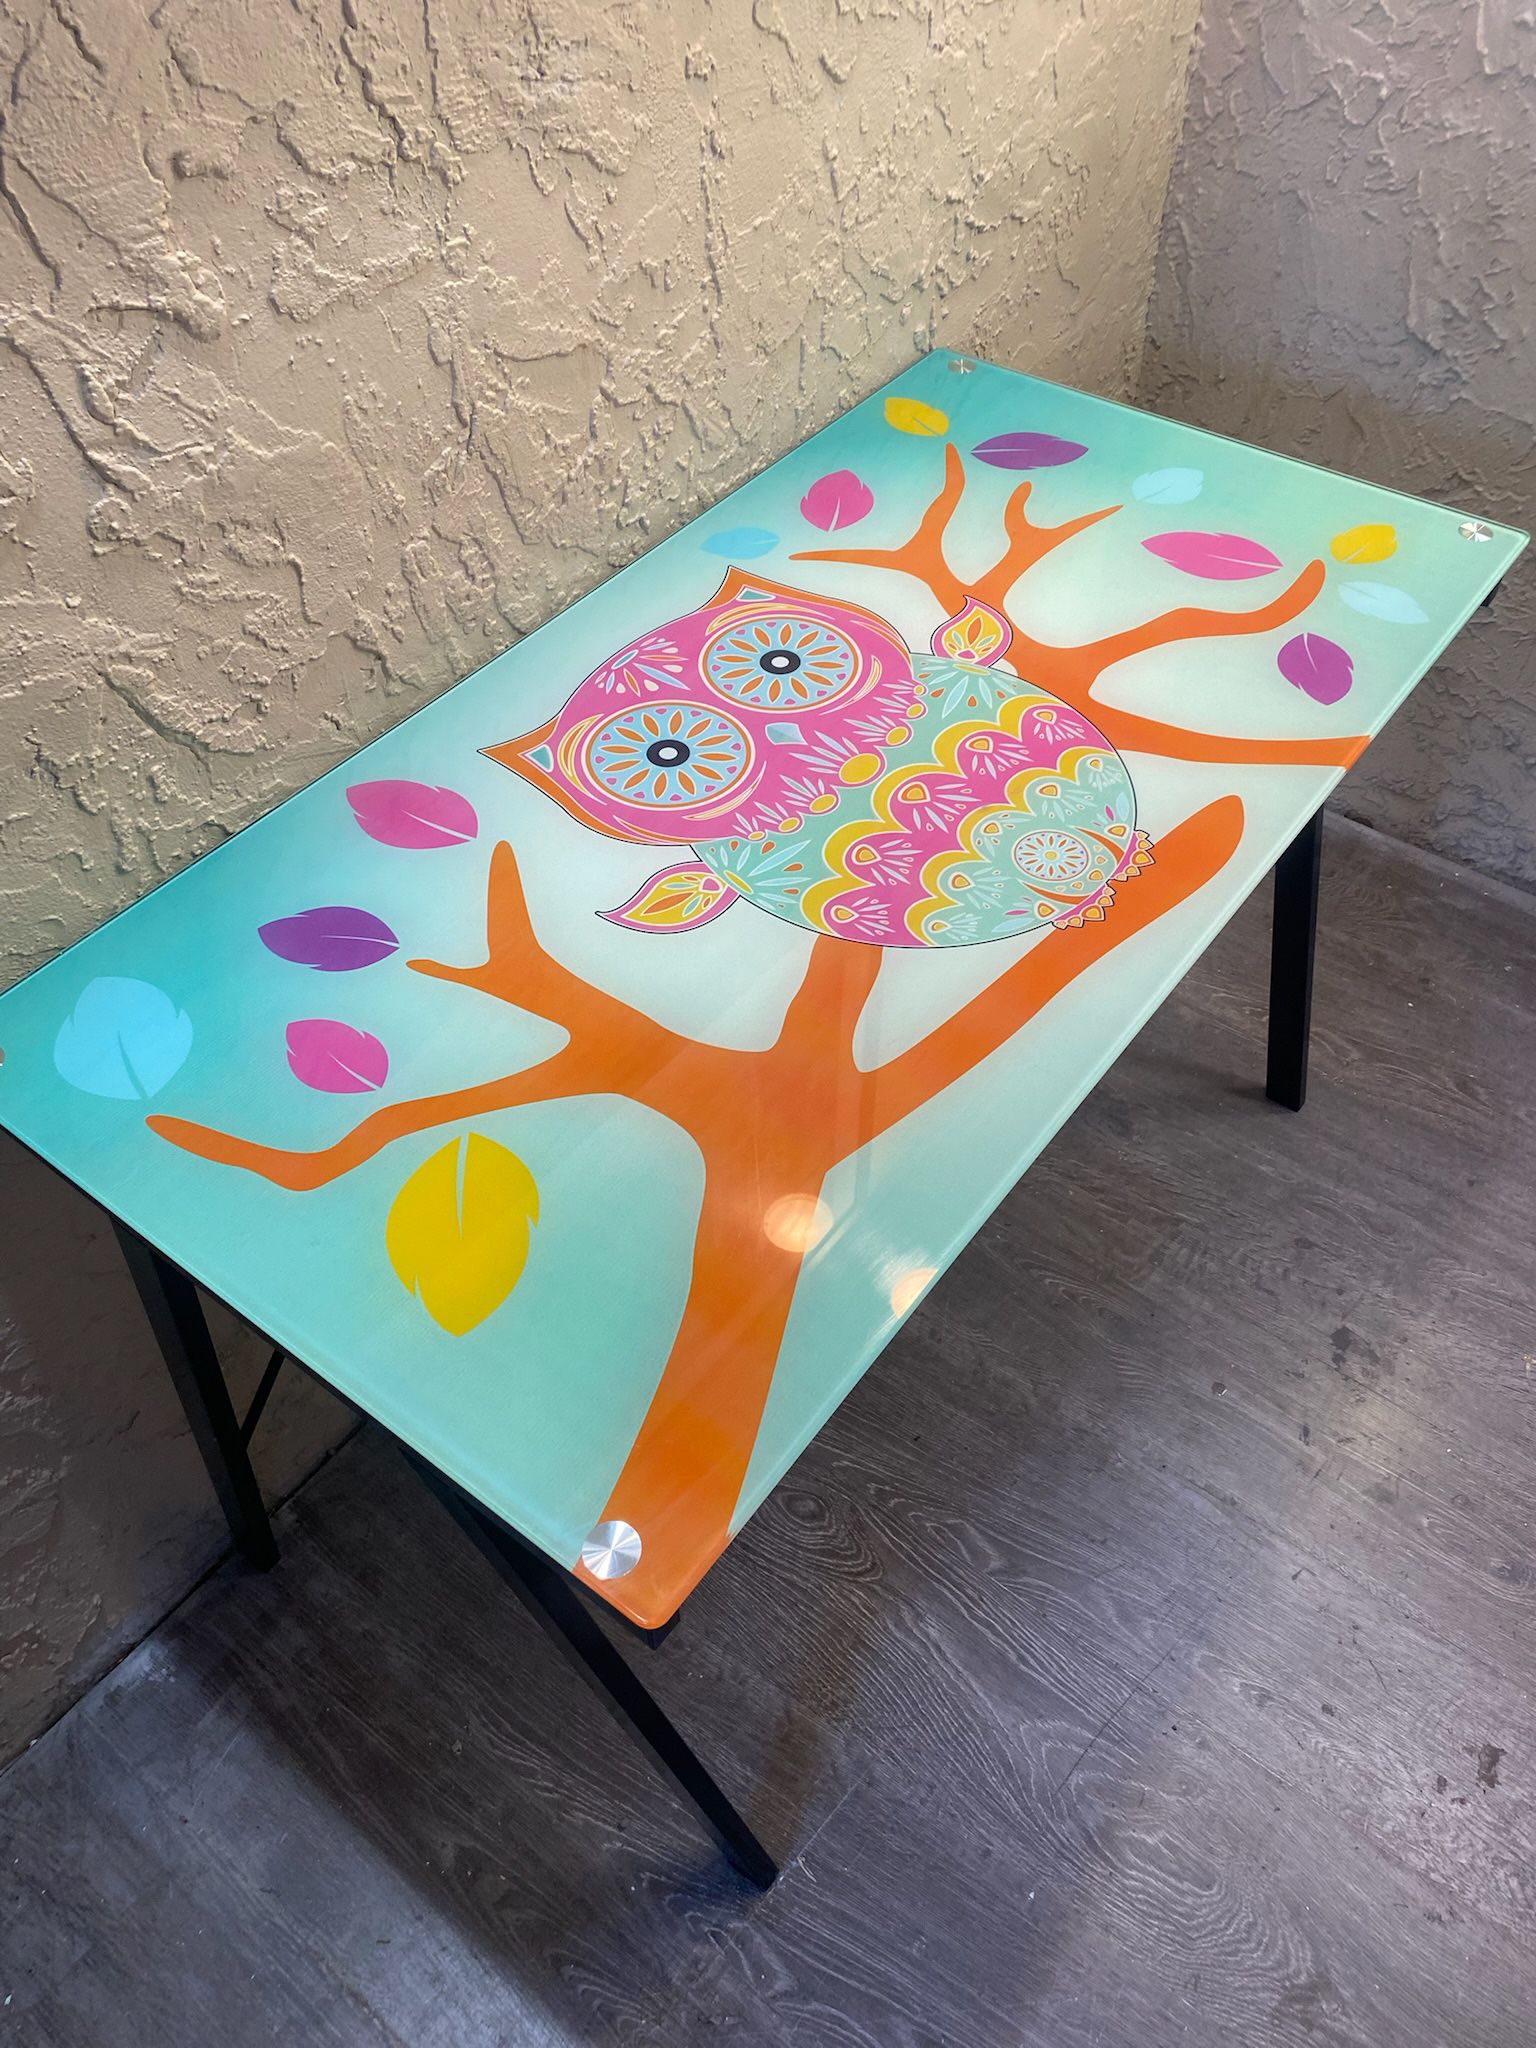 Kids Owl Green Graphic Desk - Delivery Available for a Fee - See My Items 😀